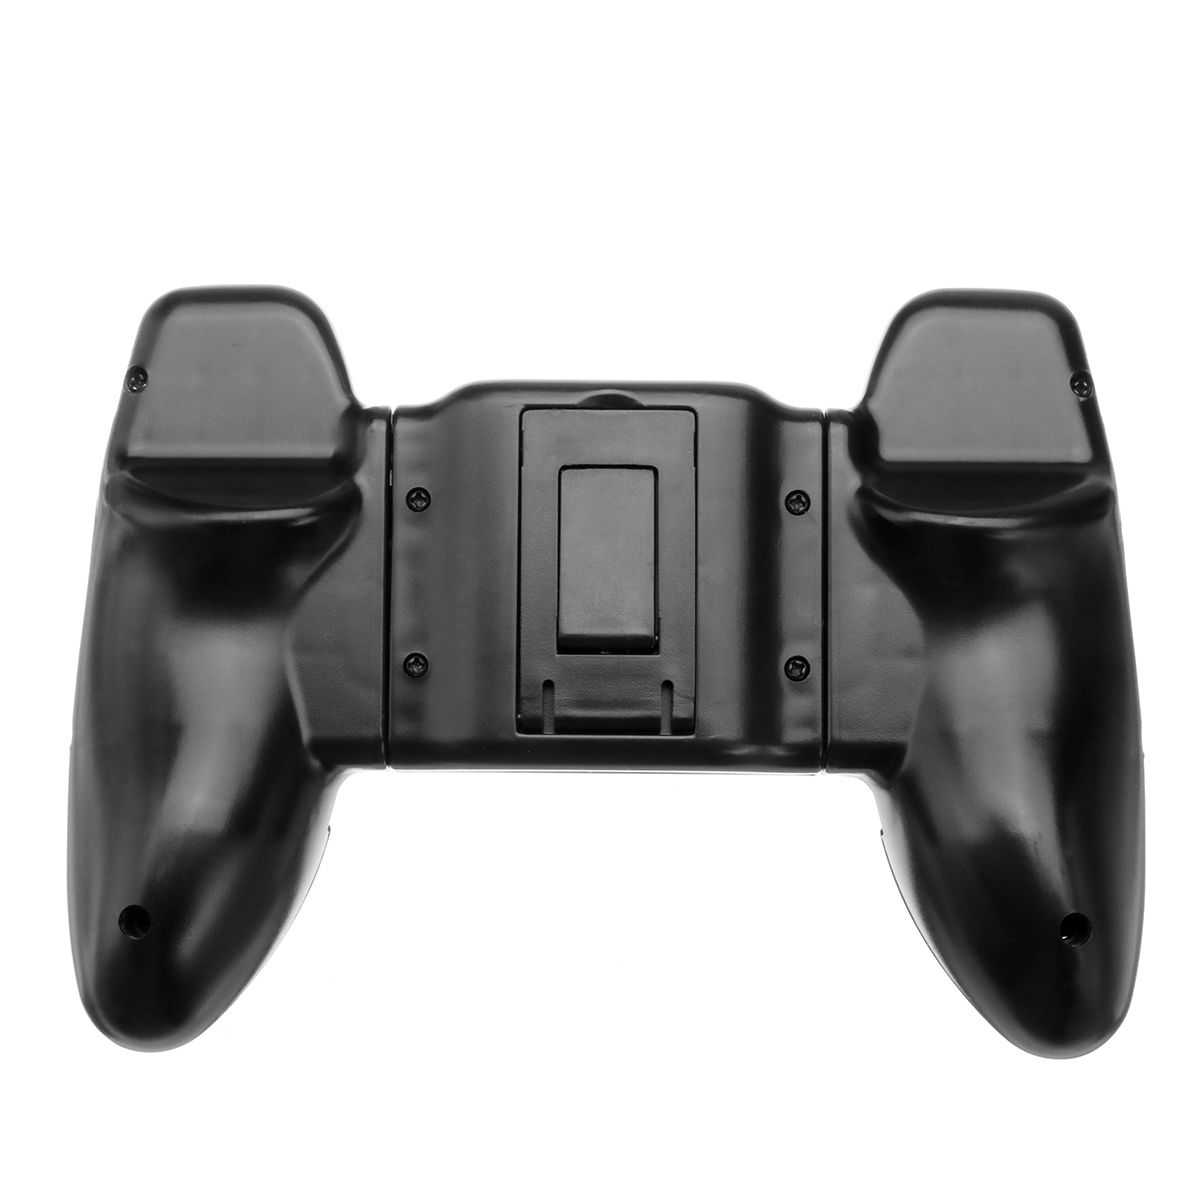 Game-Pad-Joystick-Gaming-Trigger-Shooter-Controller-for-Mobile-Phone-1617344